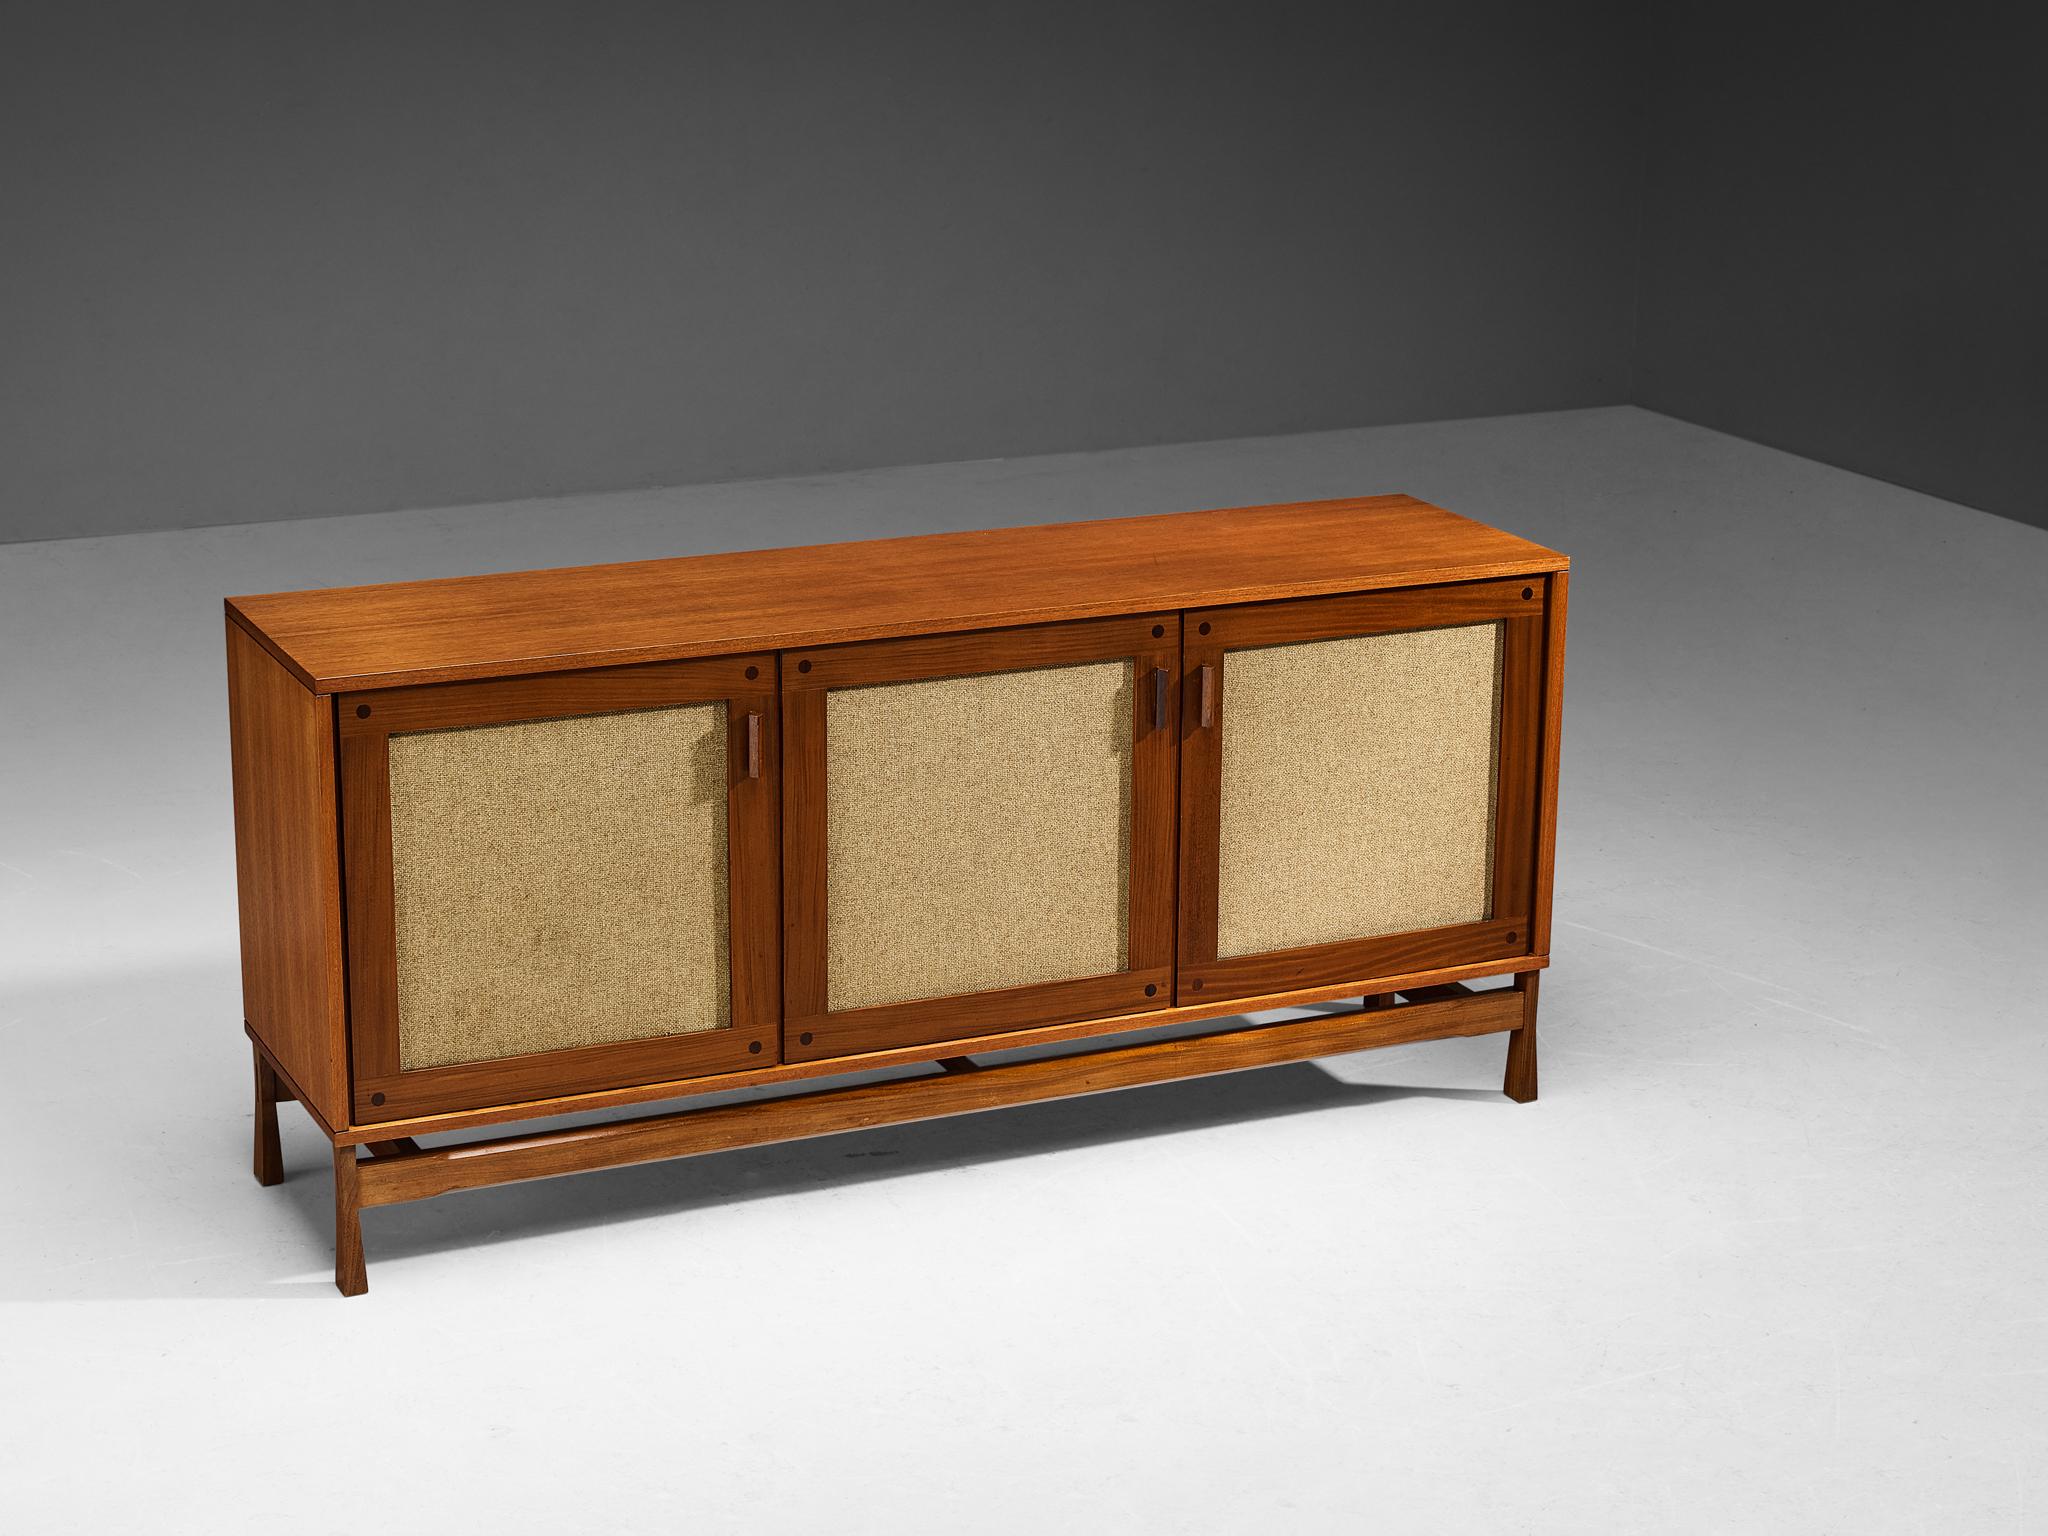 Sideboard, teak, weaved wool, Italy, 1960s

Geometry is at the forefront of this high-quality cabinet, expressed through clear lines and angular formalism. The wood joints testify of great craftsmanship and expertise. Sufficient amount of storage